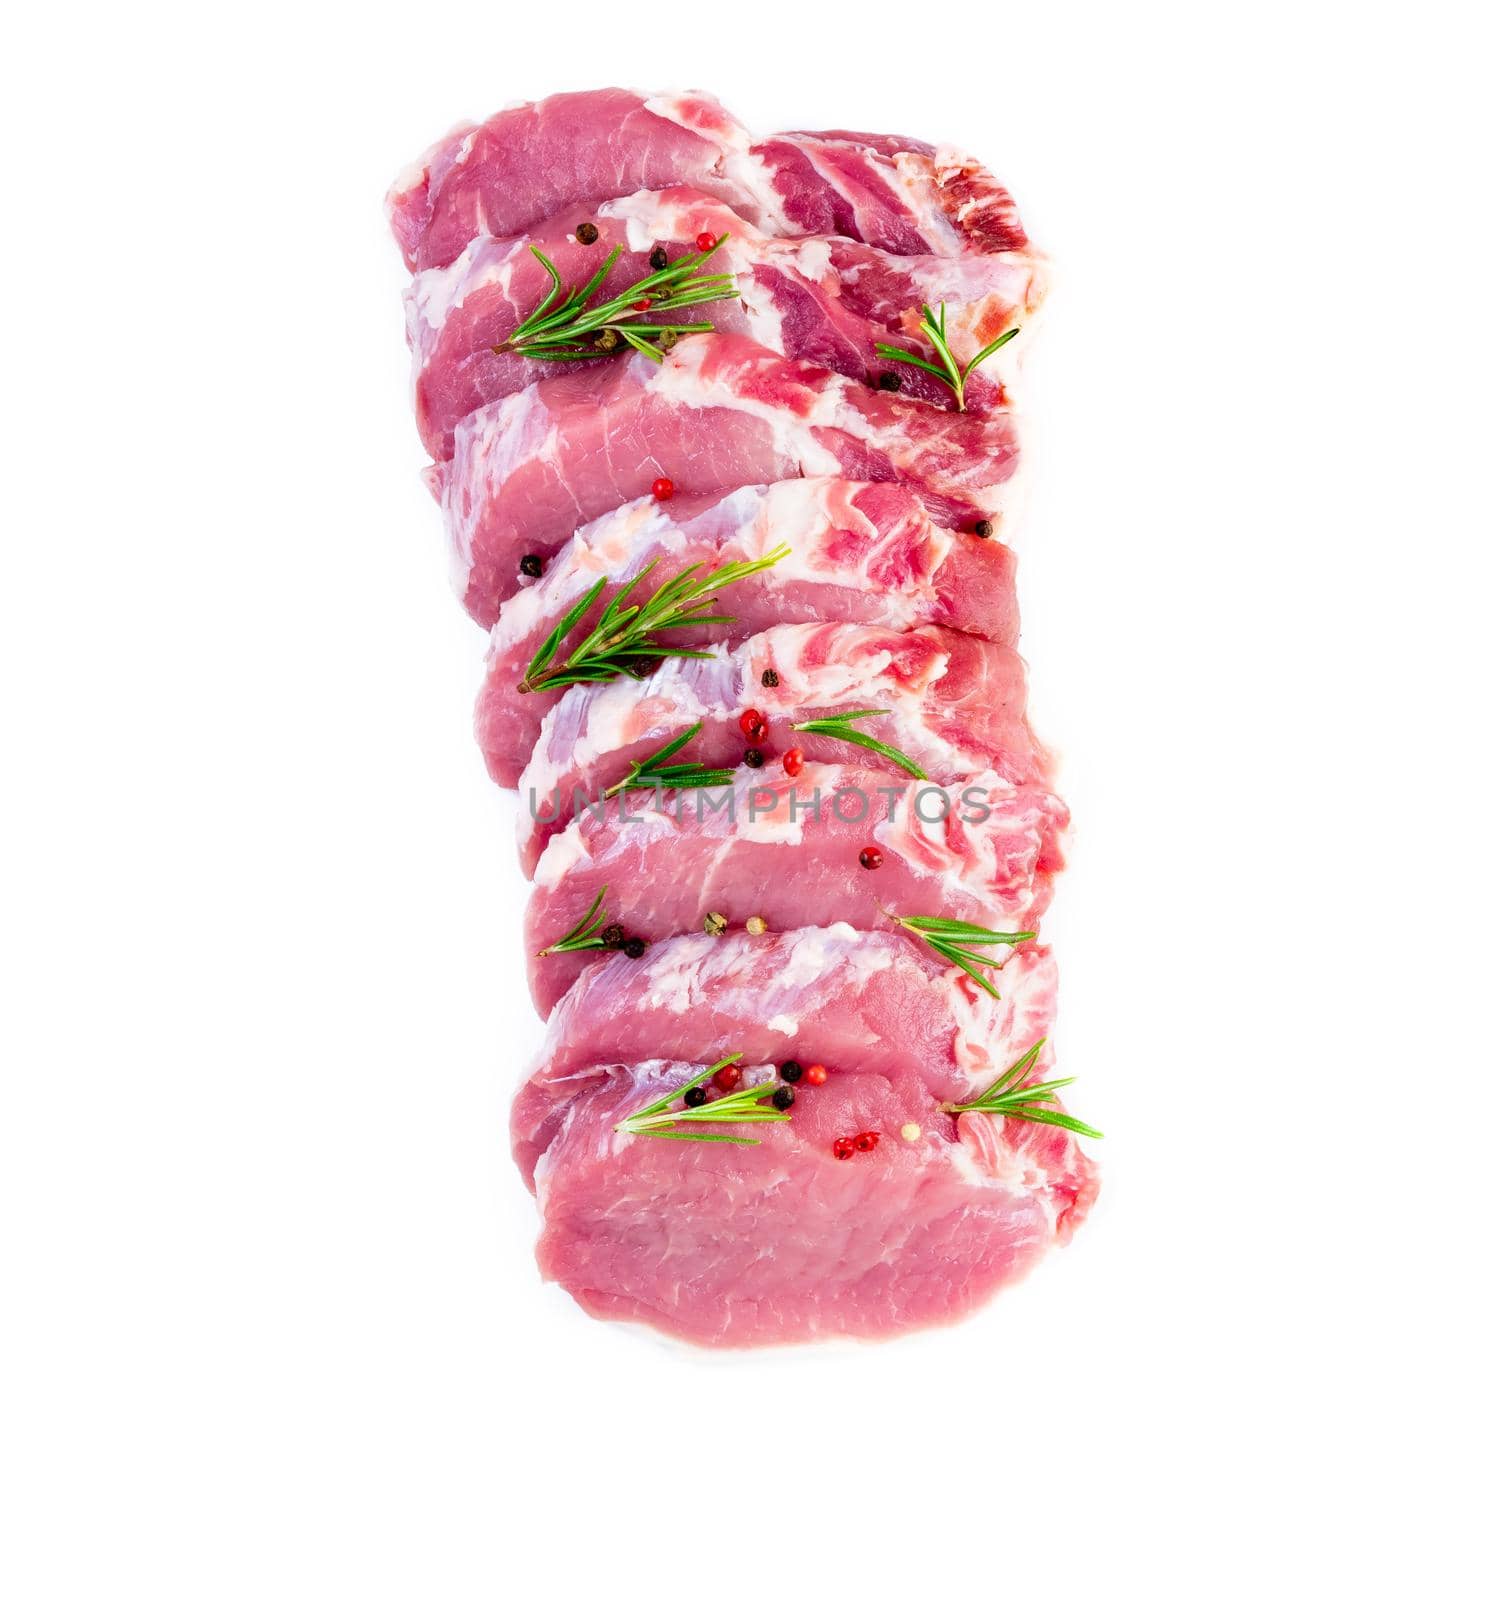 pork meat slices loin with seasoning on white background, top view.